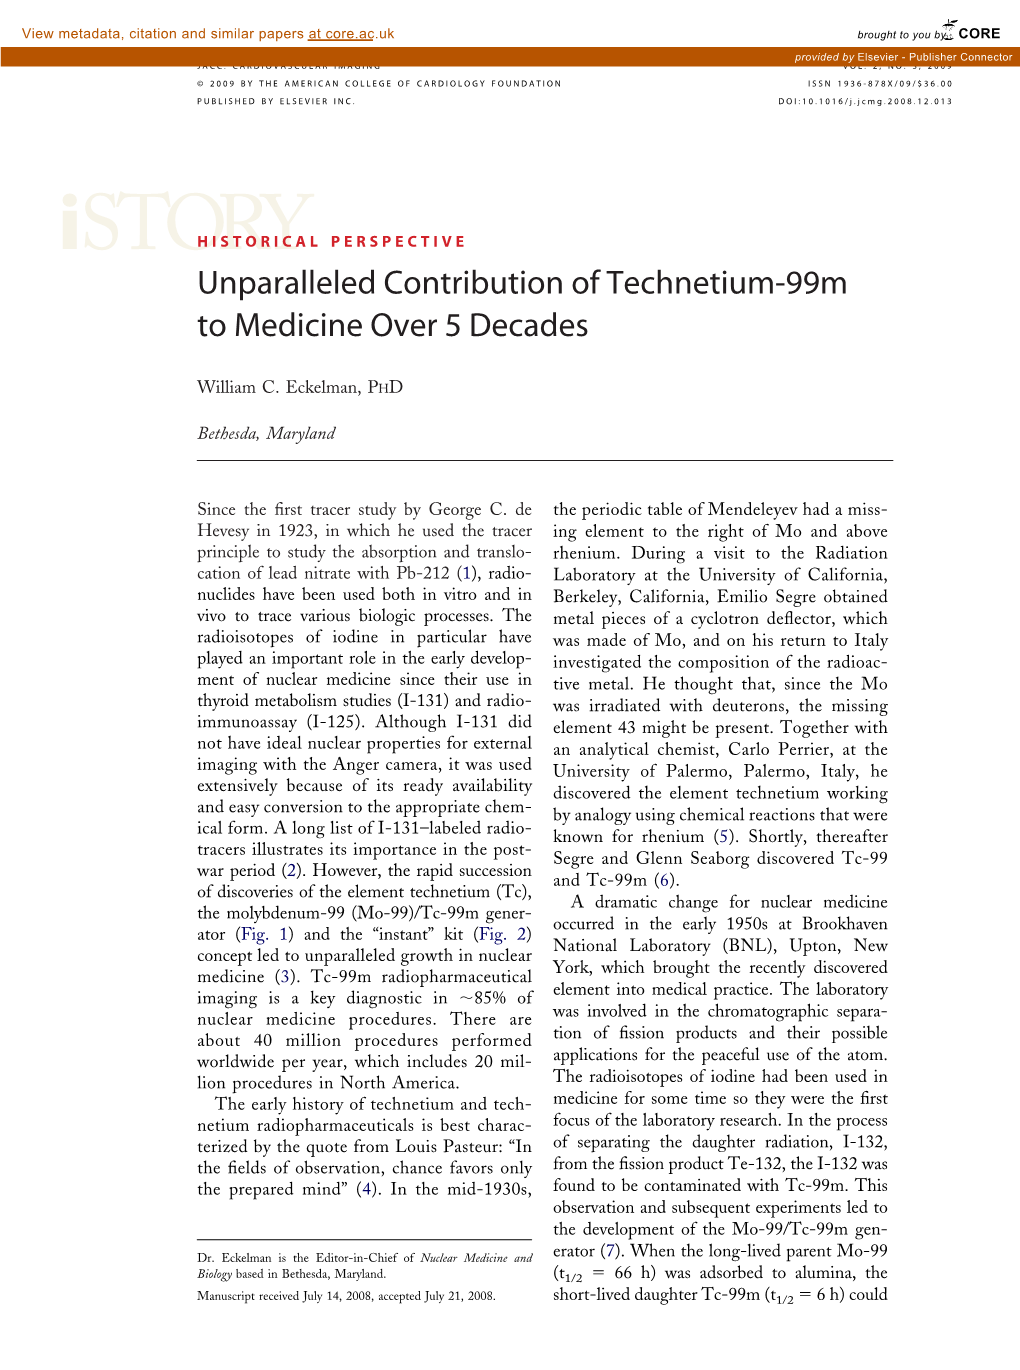 Unparalleled Contribution of Technetium-99M to Medicine Over 5 Decades